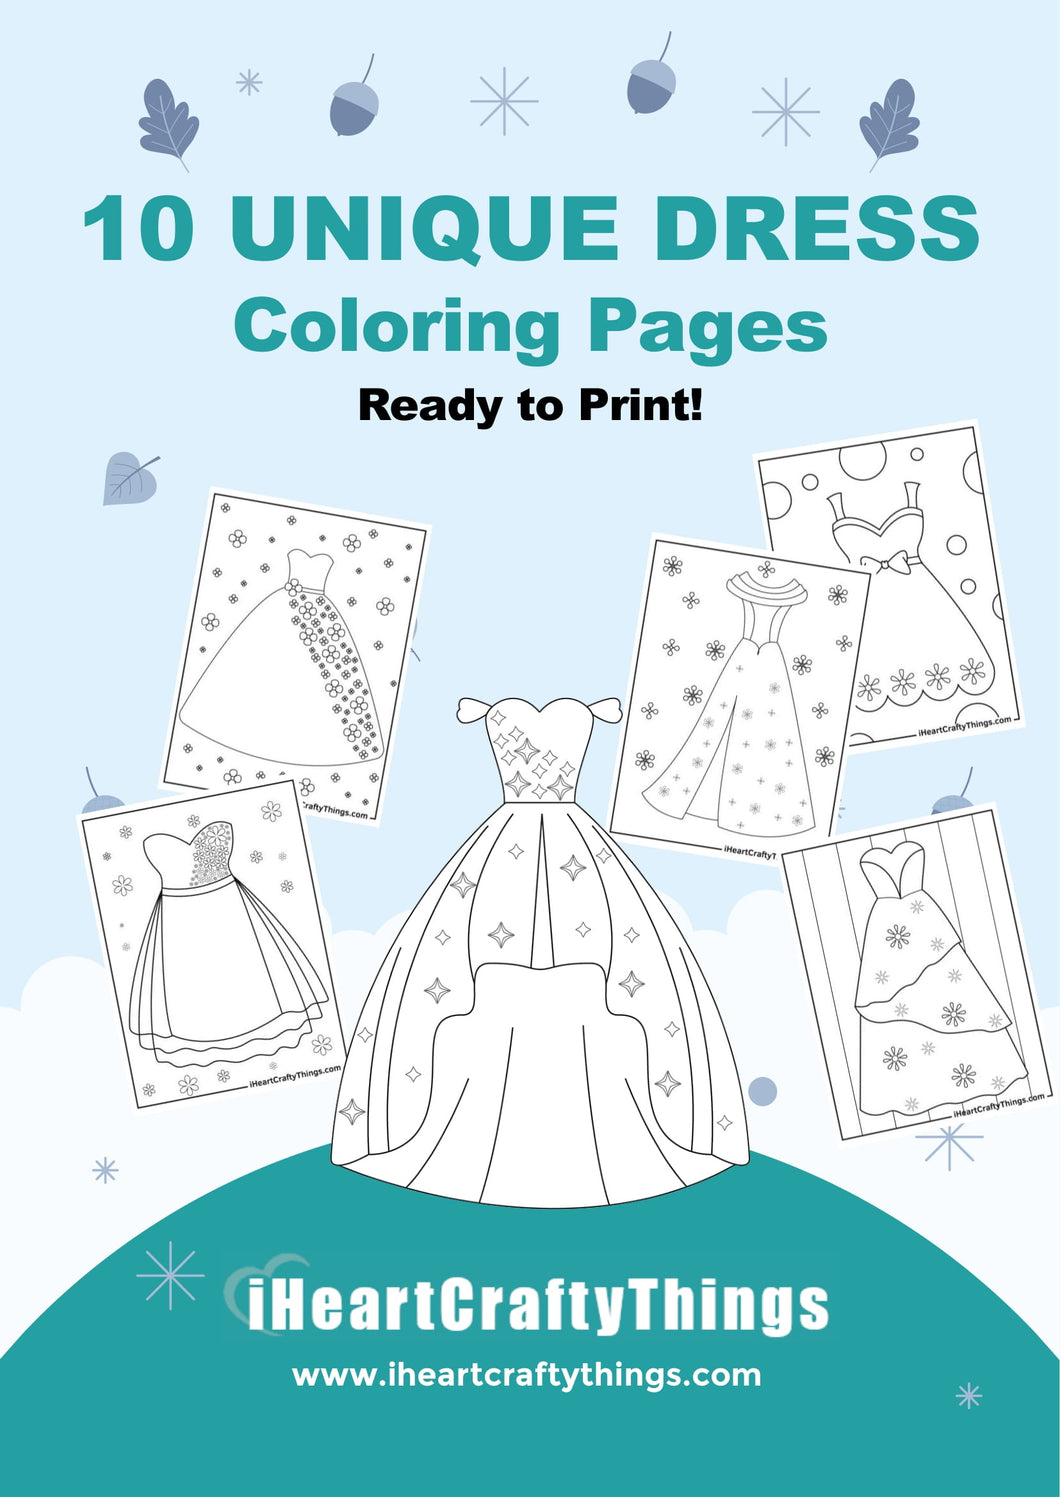  48 Dress Coloring Pages To Print  Free